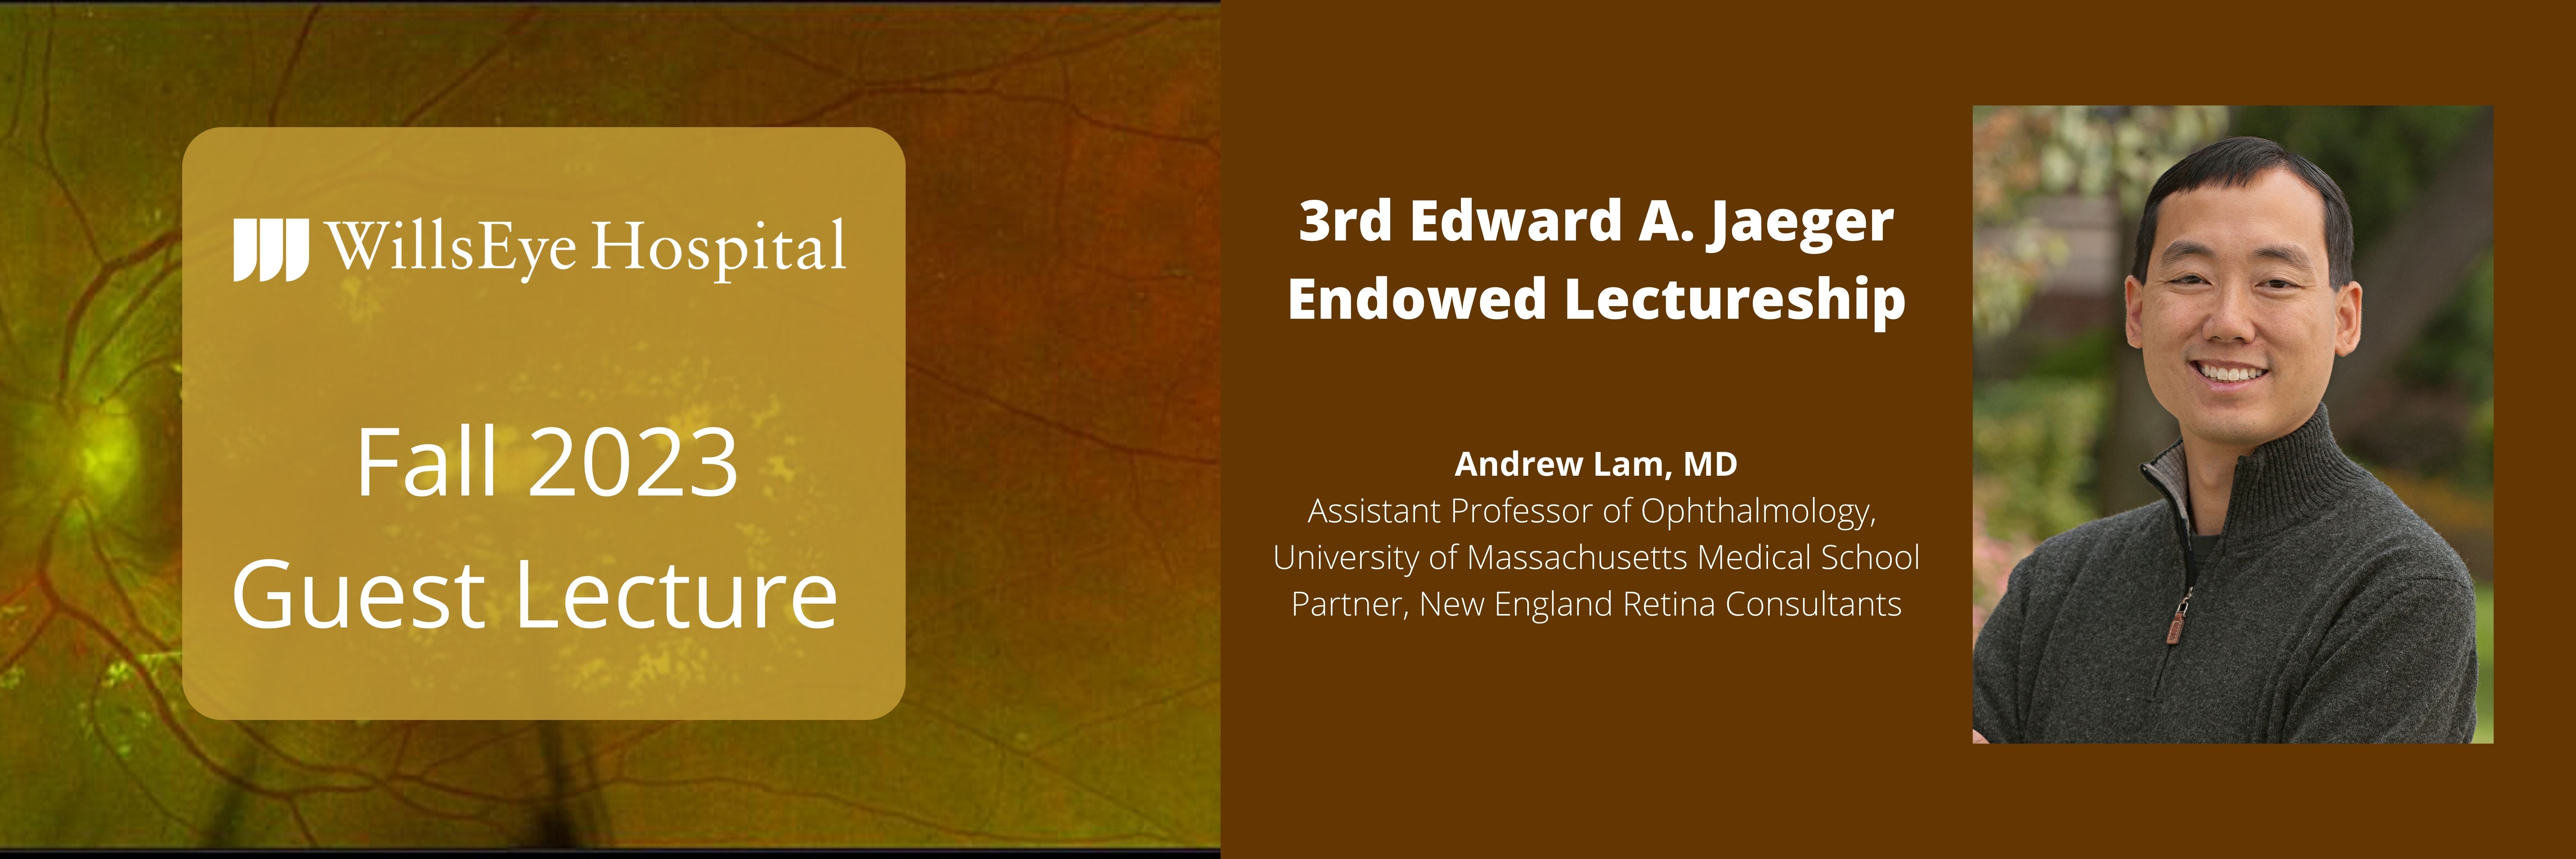 The 3rd Edward A. Jaeger Endowed Lectureship – The Mavericks: Philadelphia Surgeons Who Transformed Medicine and Changed the World [Non-CME] Banner